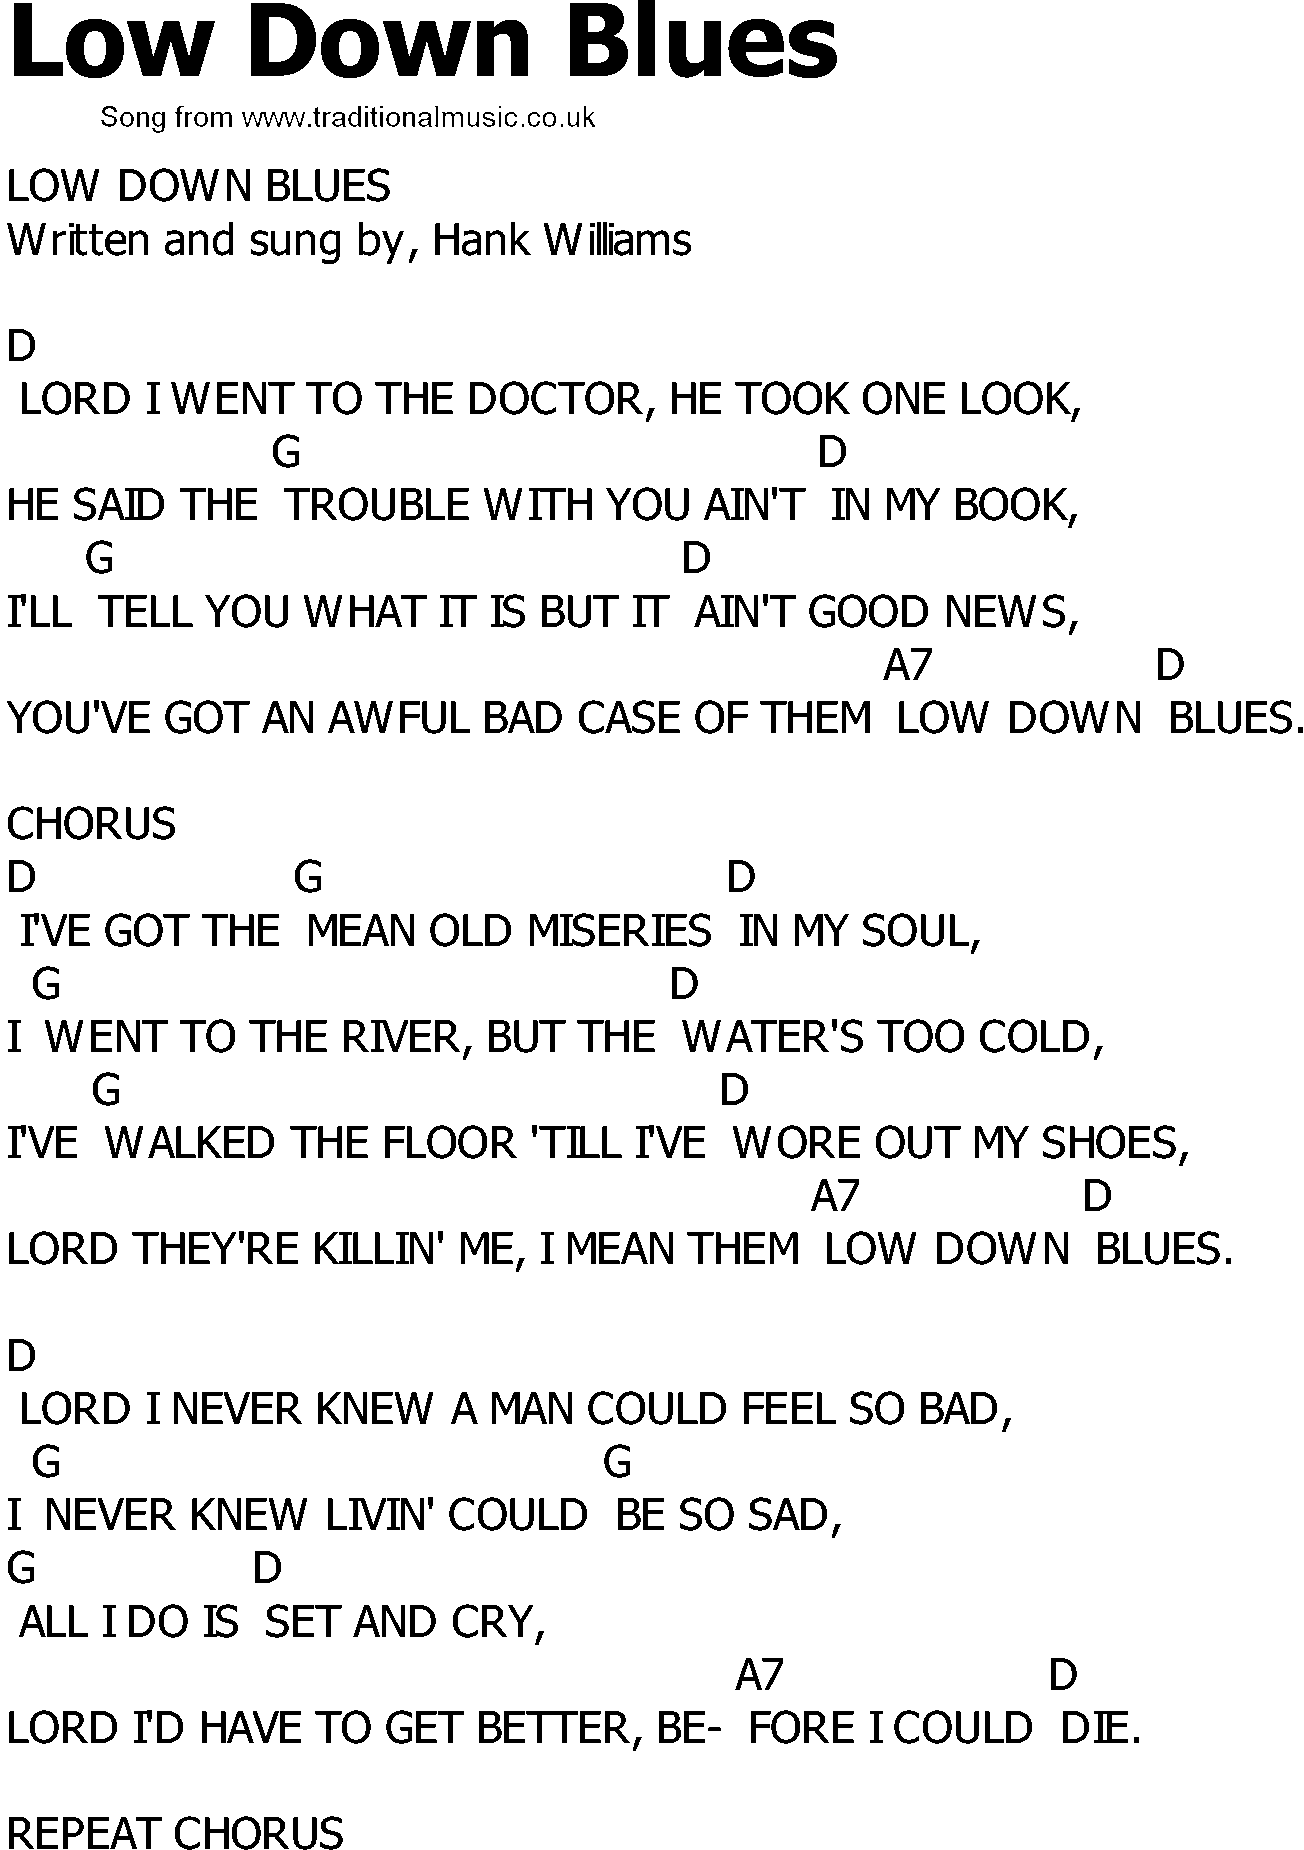 Old Country song lyrics with chords - Low Down Blues